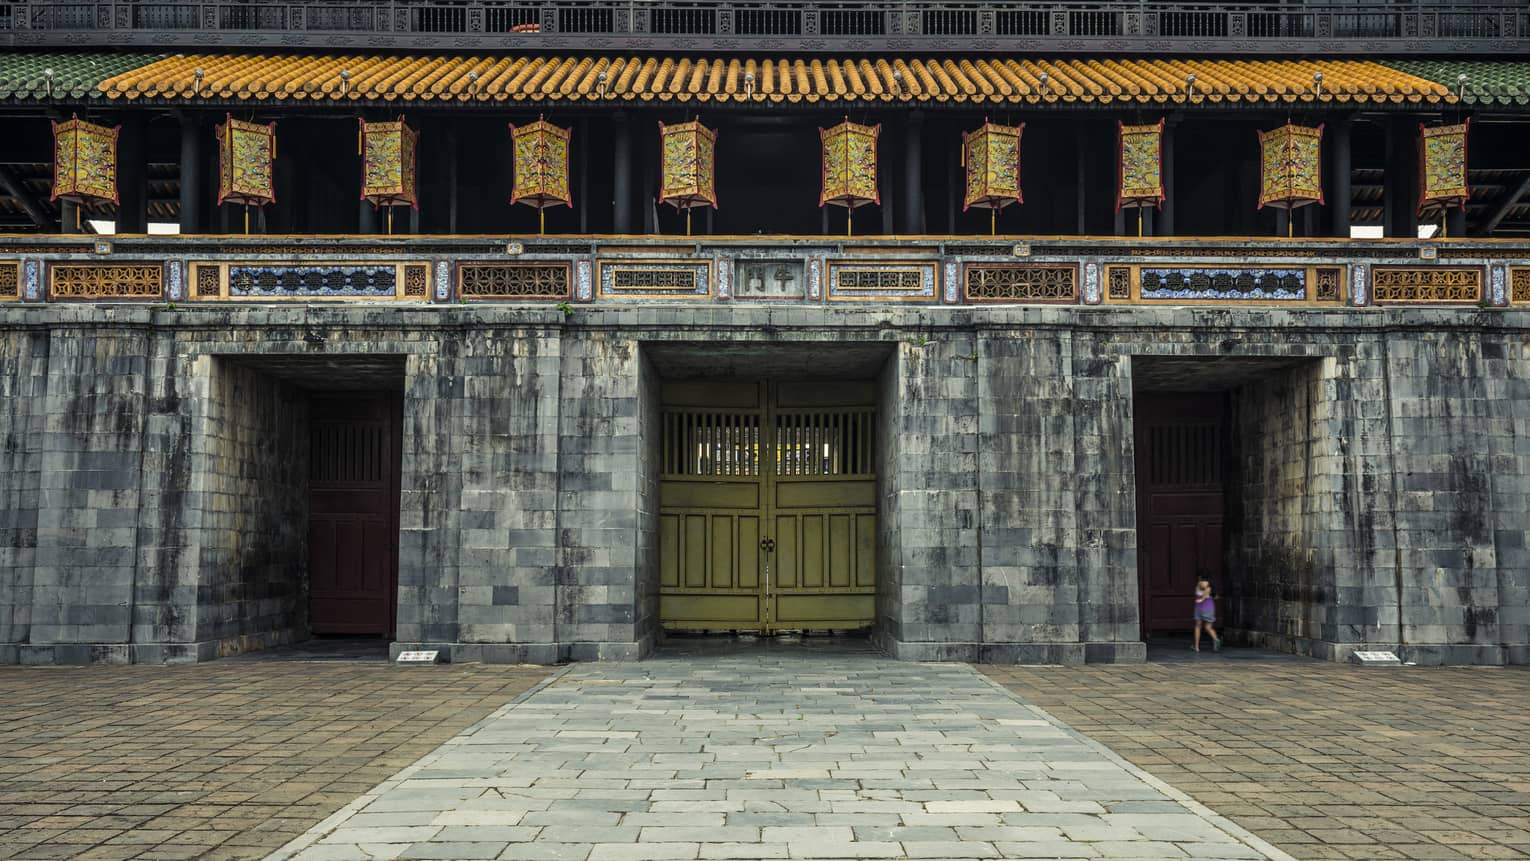 View of entrance to an ornate building in Hue City - Imperial City